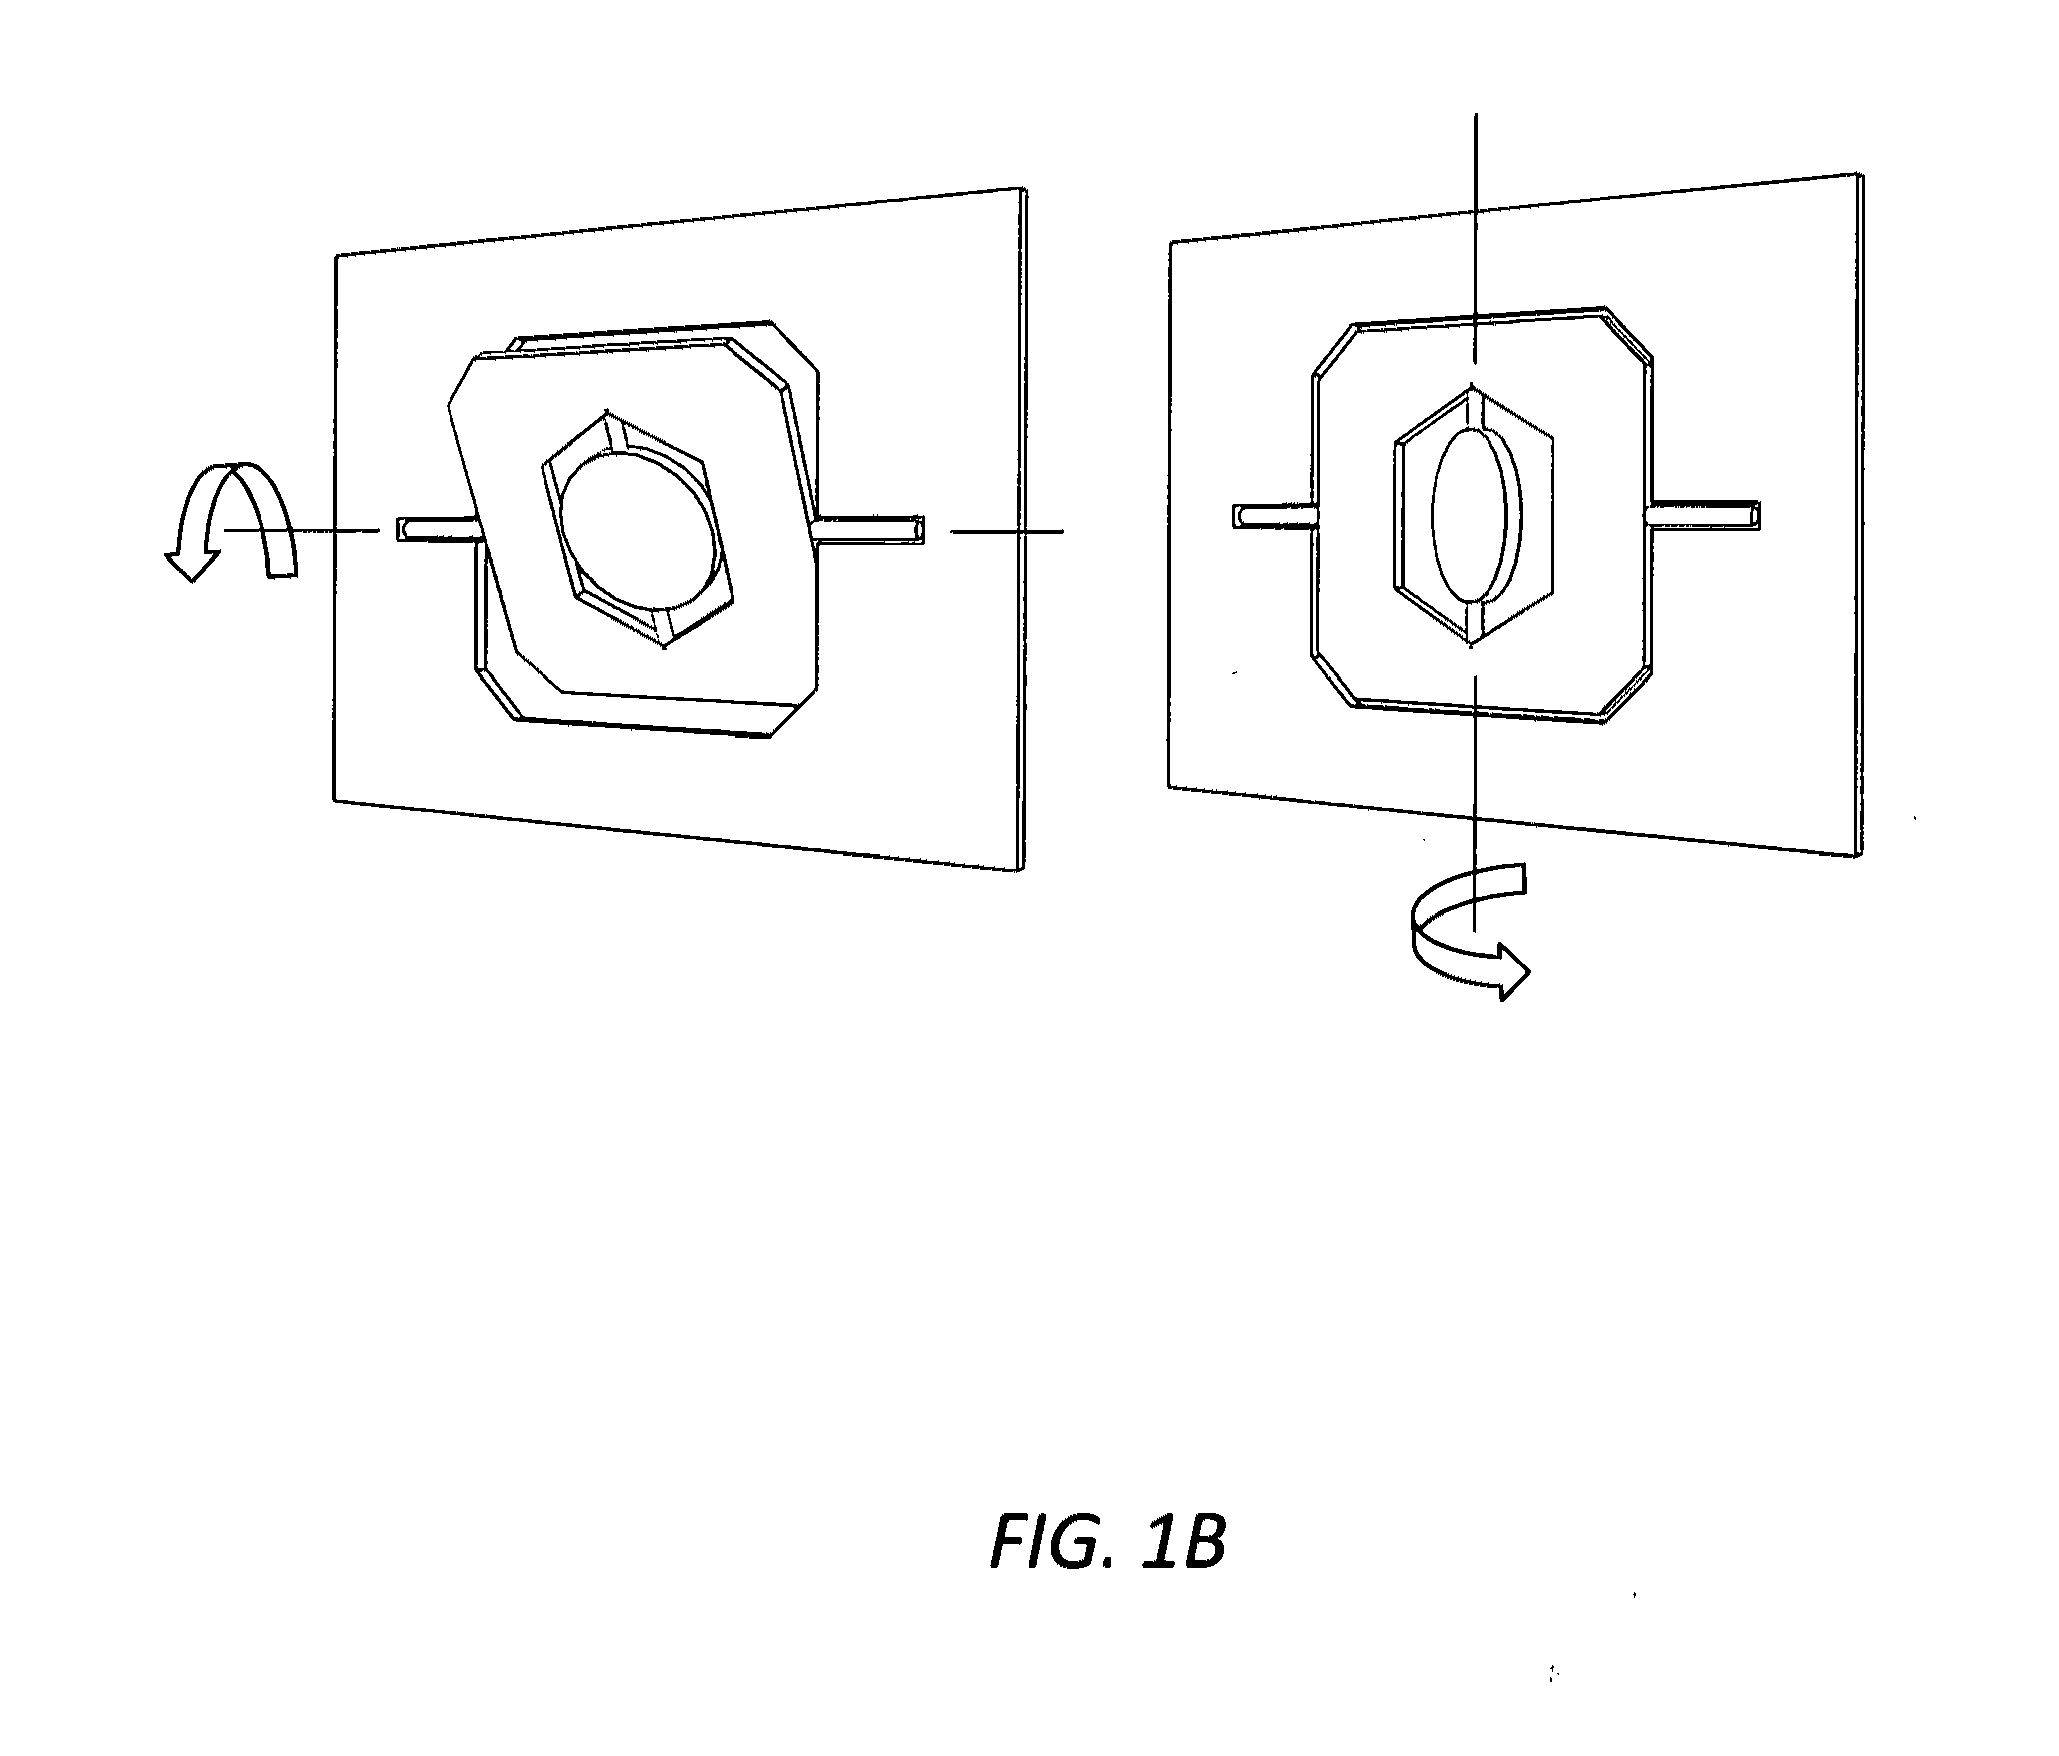 Dynamic foveal vision display